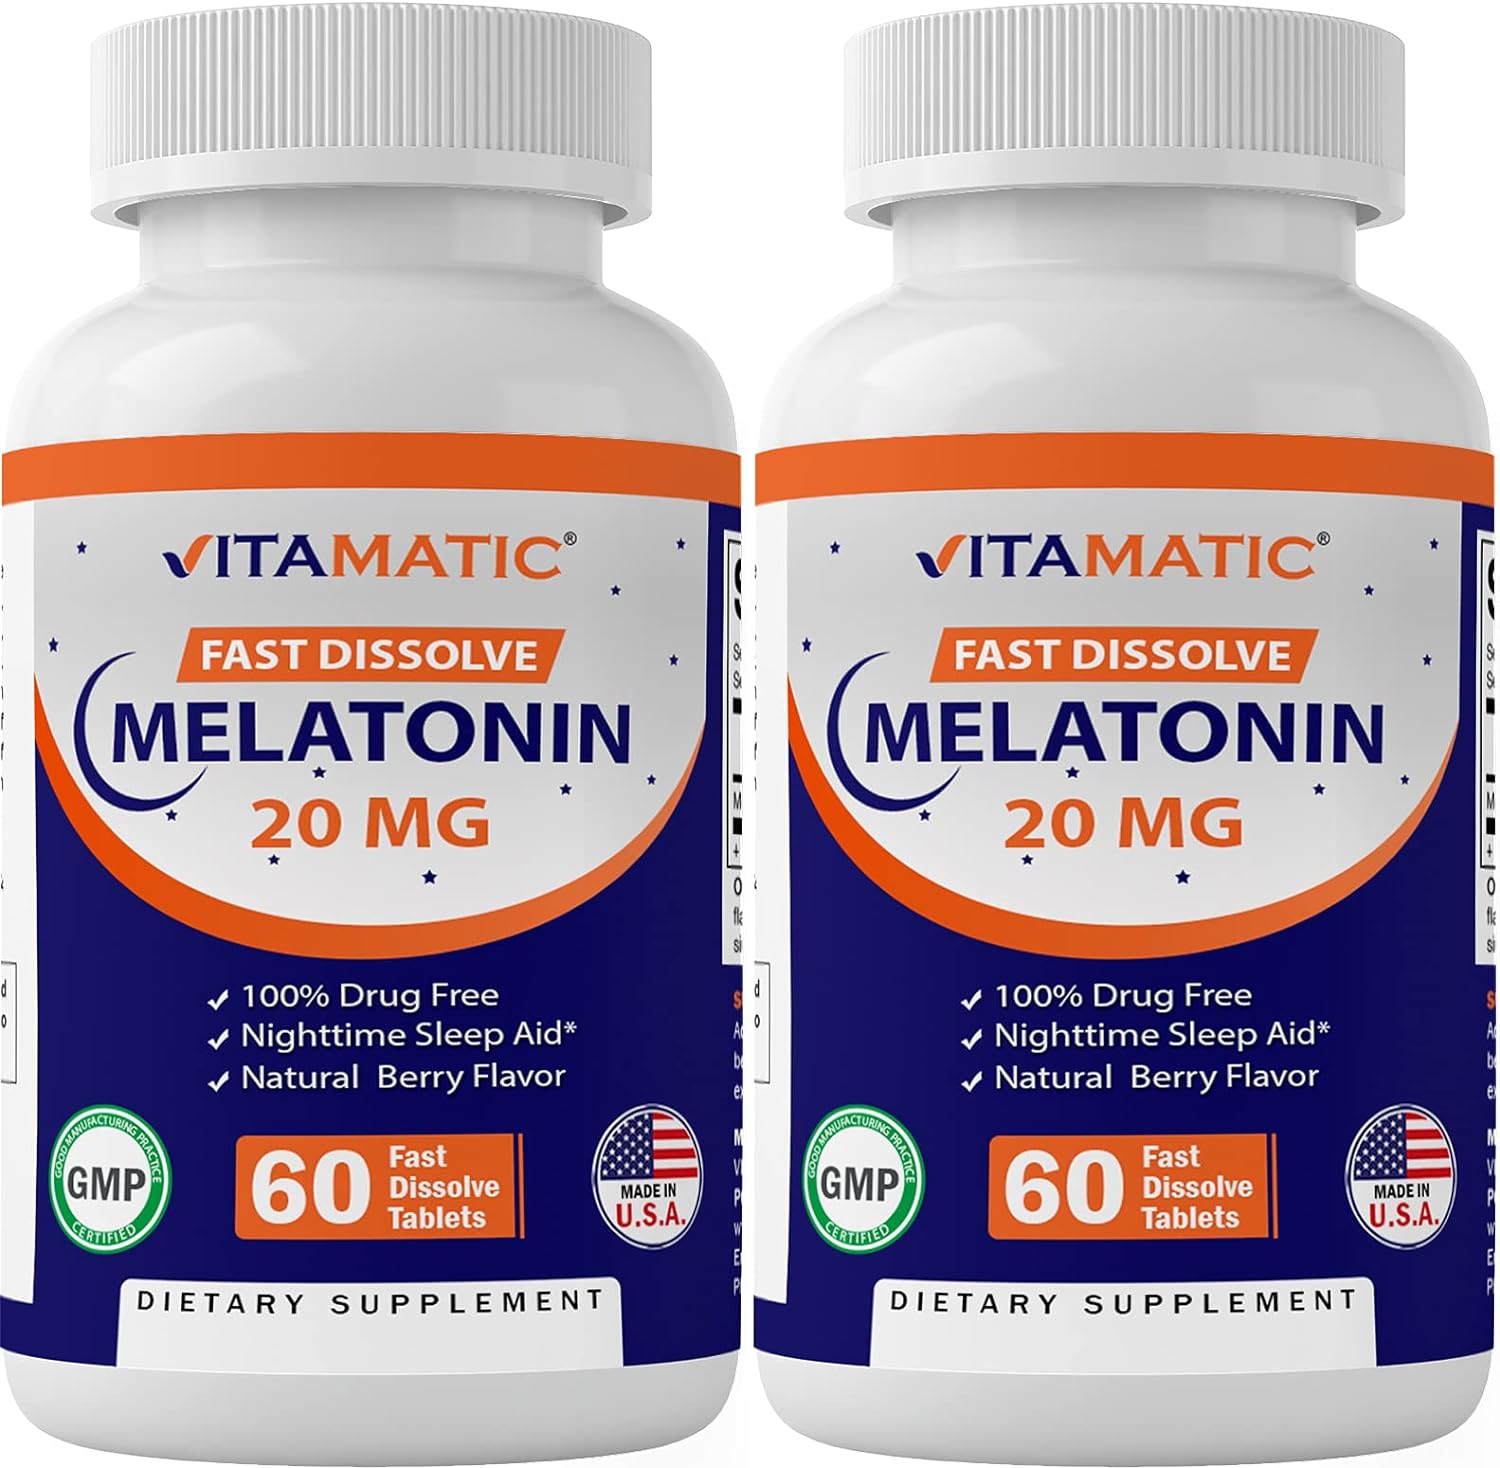 2 Pack High Potency Melatonin 20mg Tablets | Vegetarian, Non-GMO, Gluten Free | 60 Fast Dissolve Tablets | Natural Berry Flavor |